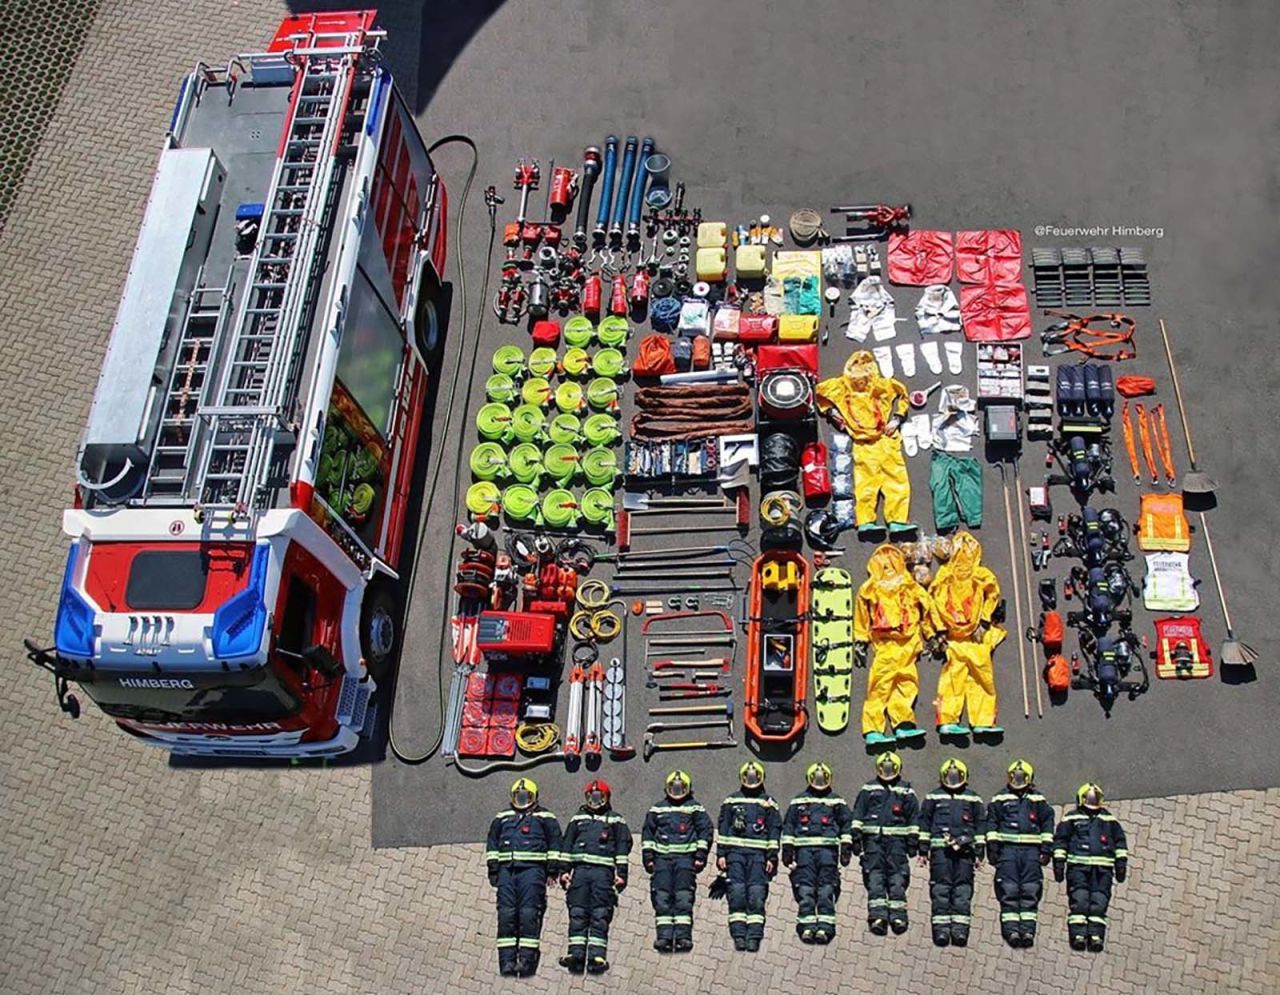 The Himberg Fire Department in Austria displays all the technology and individual parts that go into its fire truck.